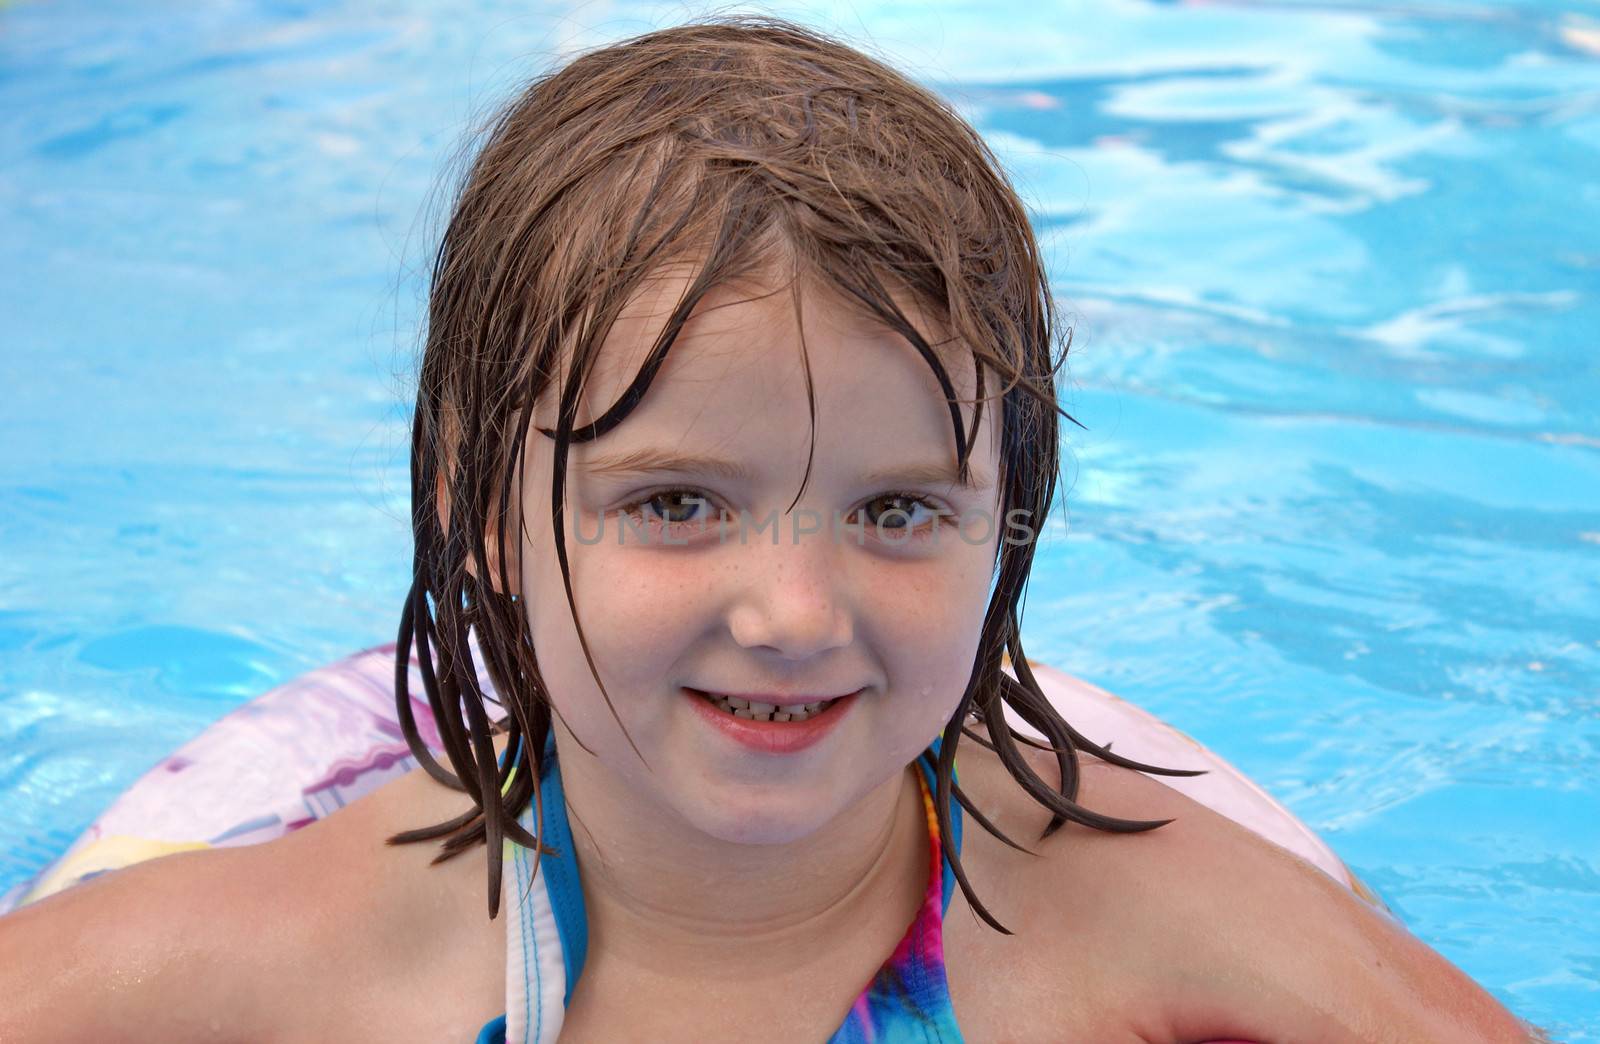 An adorable five year old girl enjoys some recreational time in the pool.